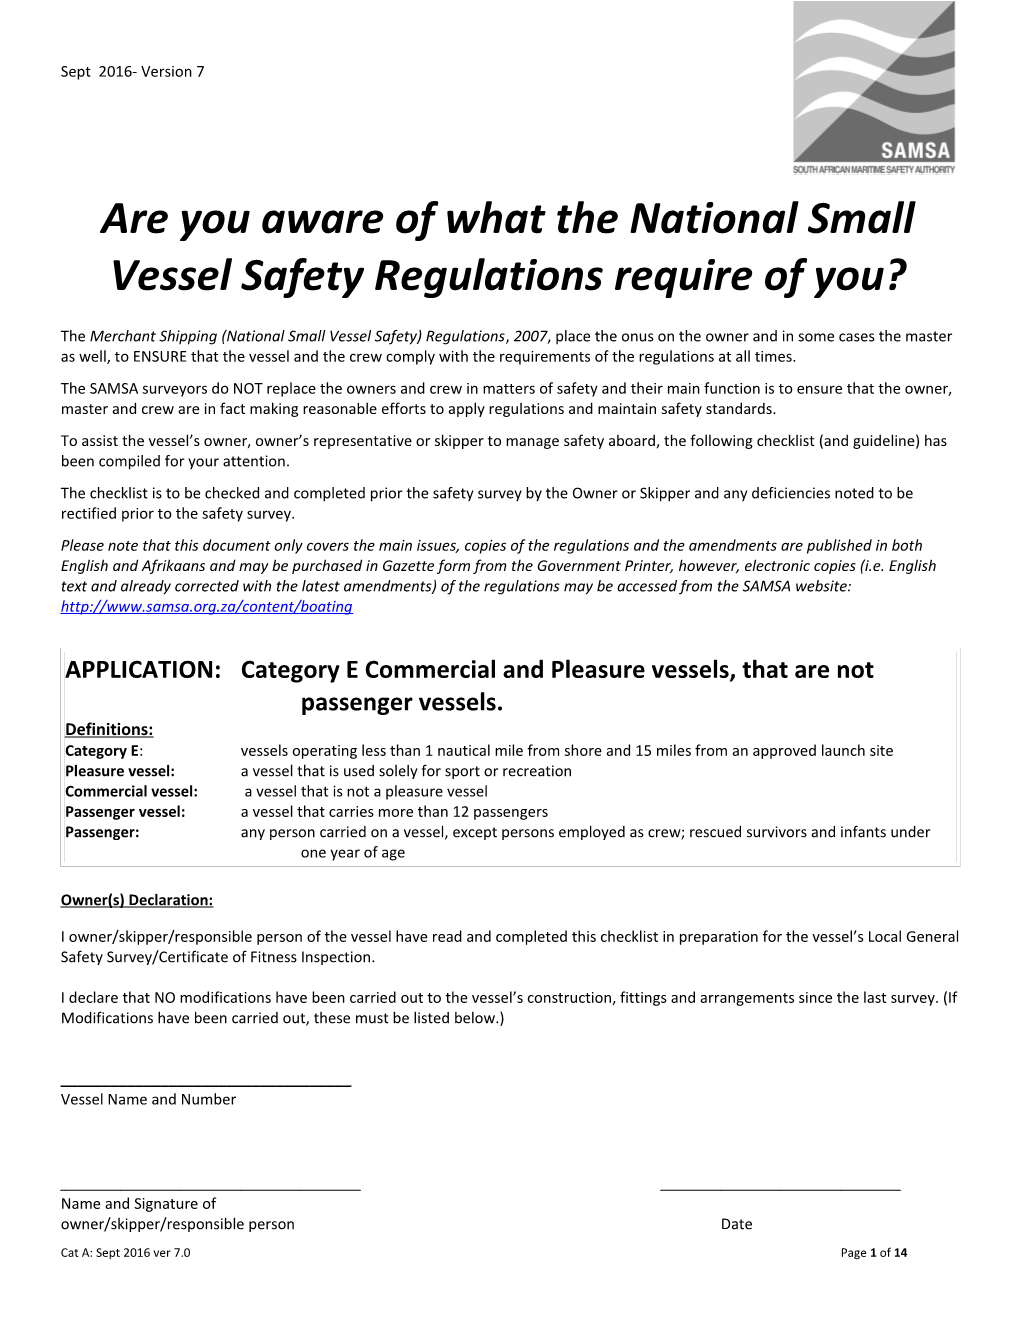 Are You Aware of What the Nationalsmall Vessel Safety Regulations Require of You?